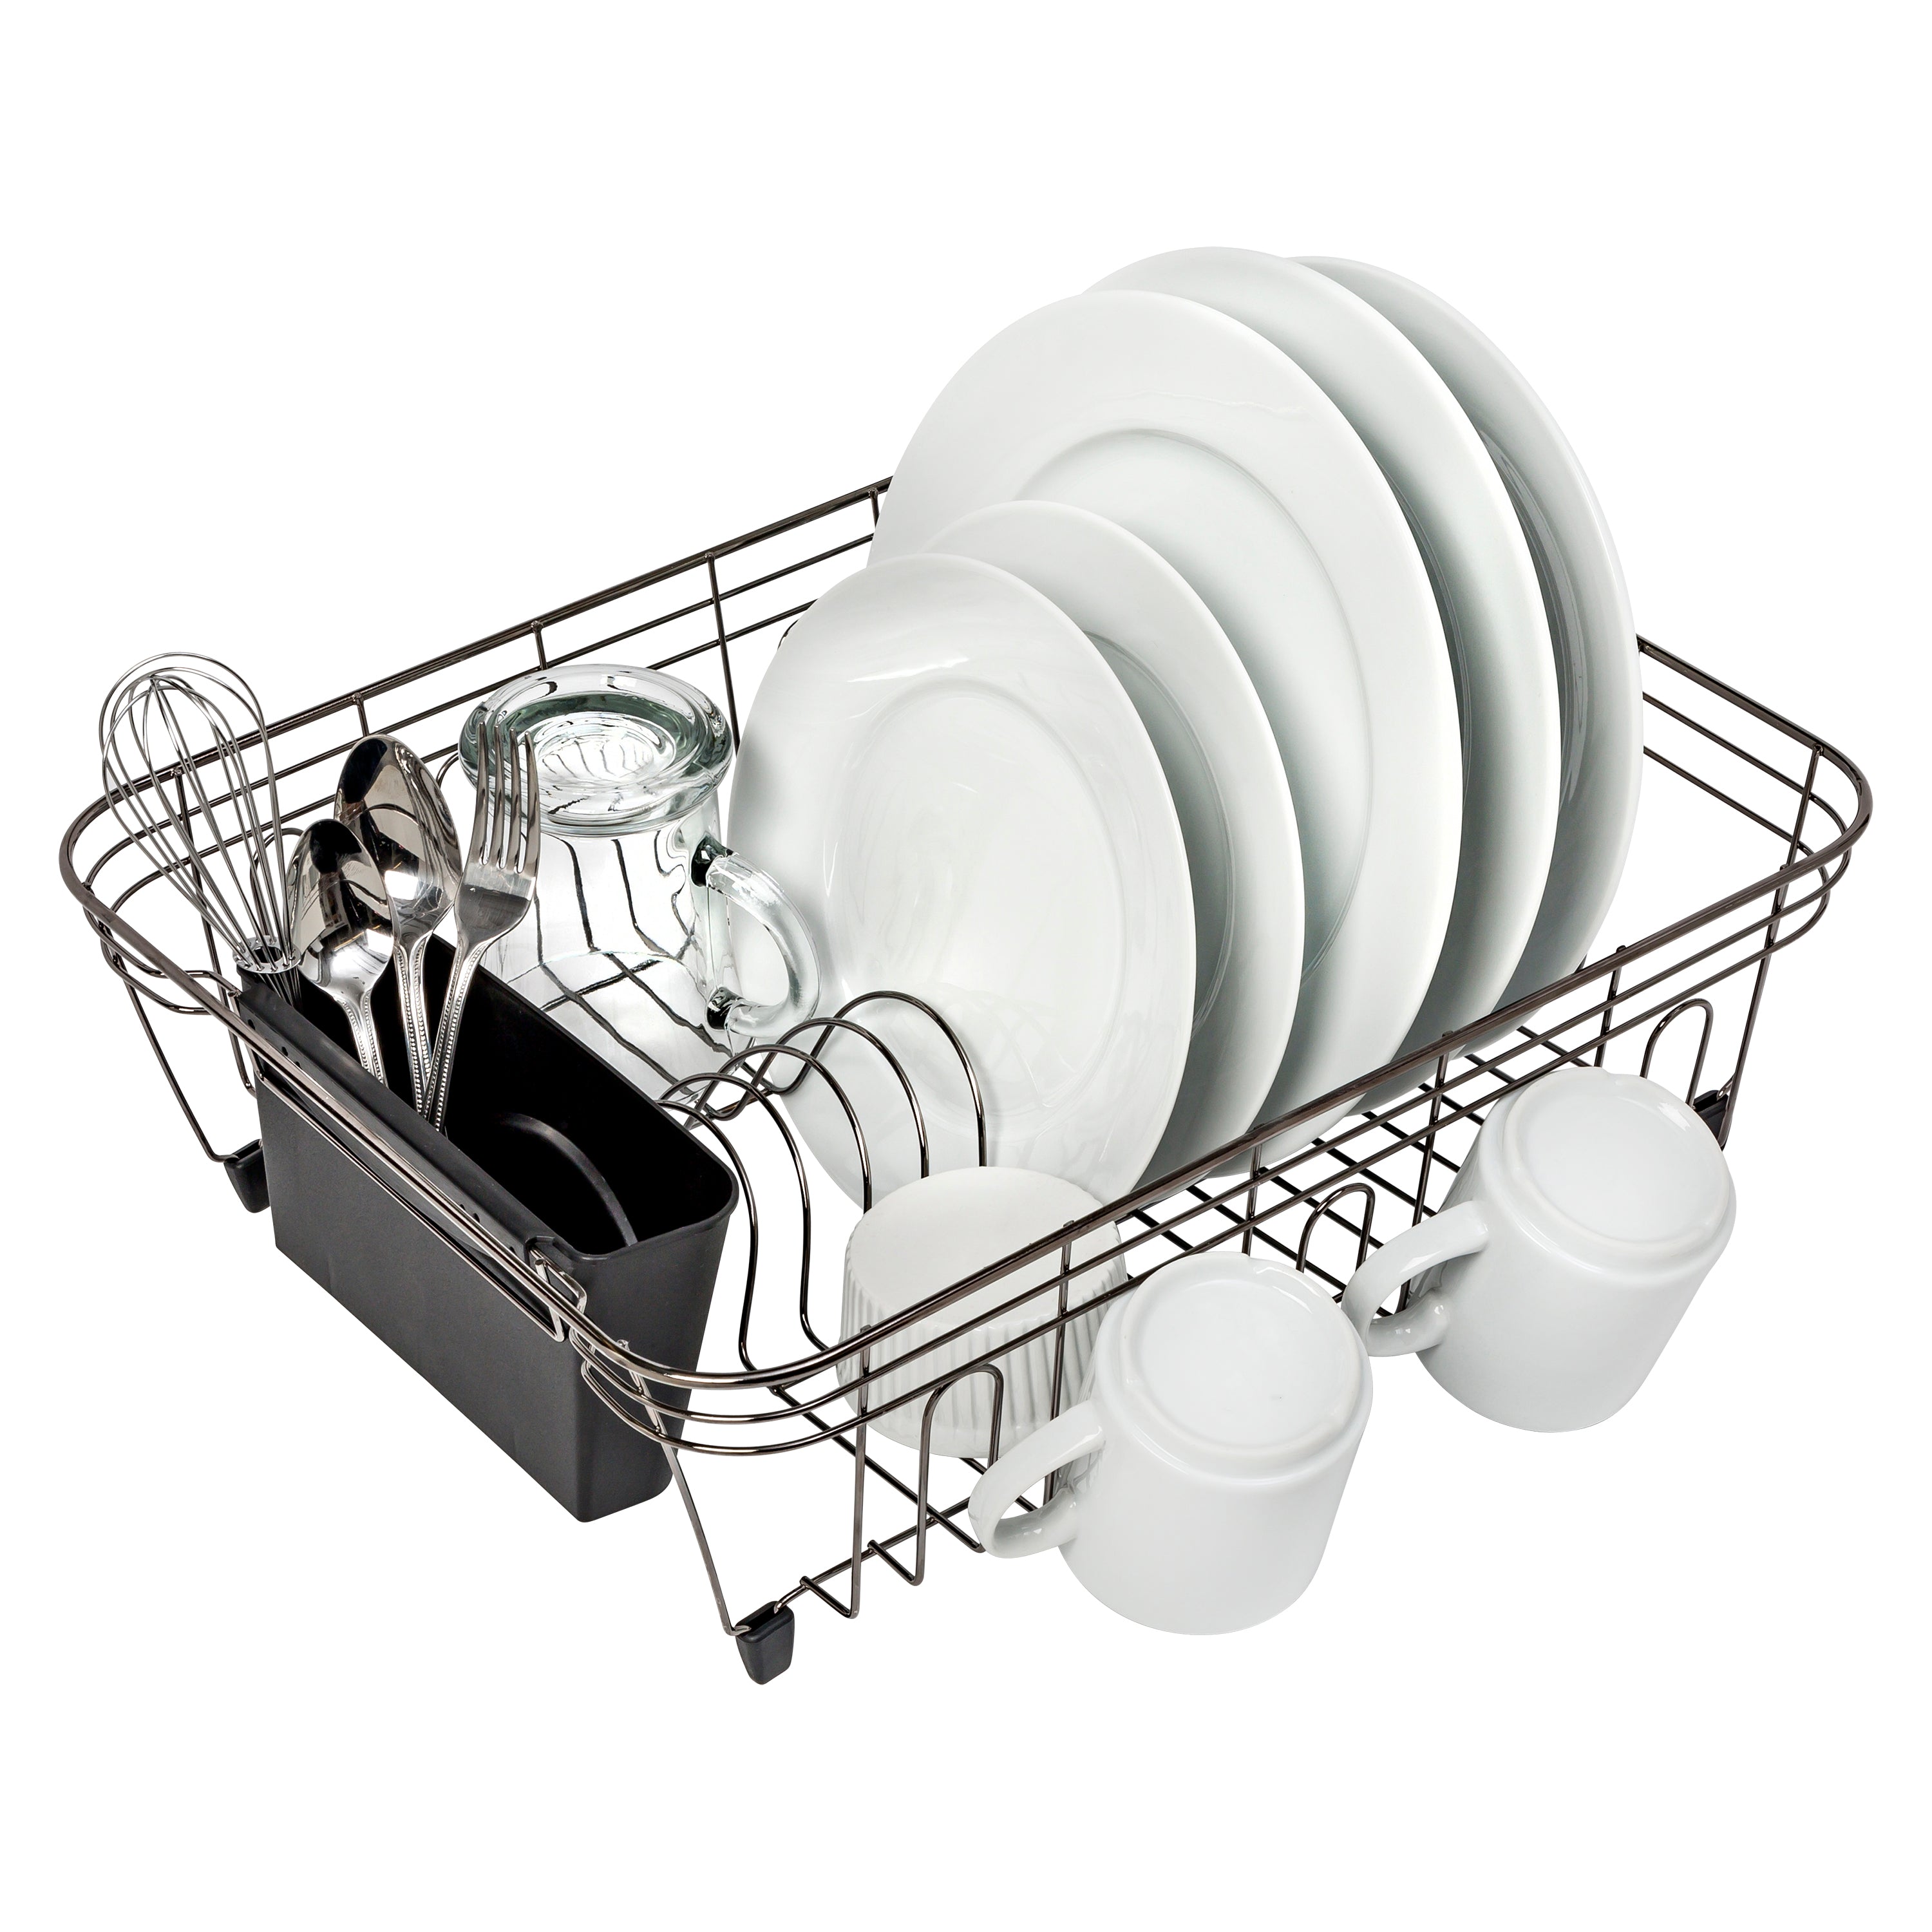 Matte Black Coated Metal Wire Kitchen Dish Drying Rack, Dinner